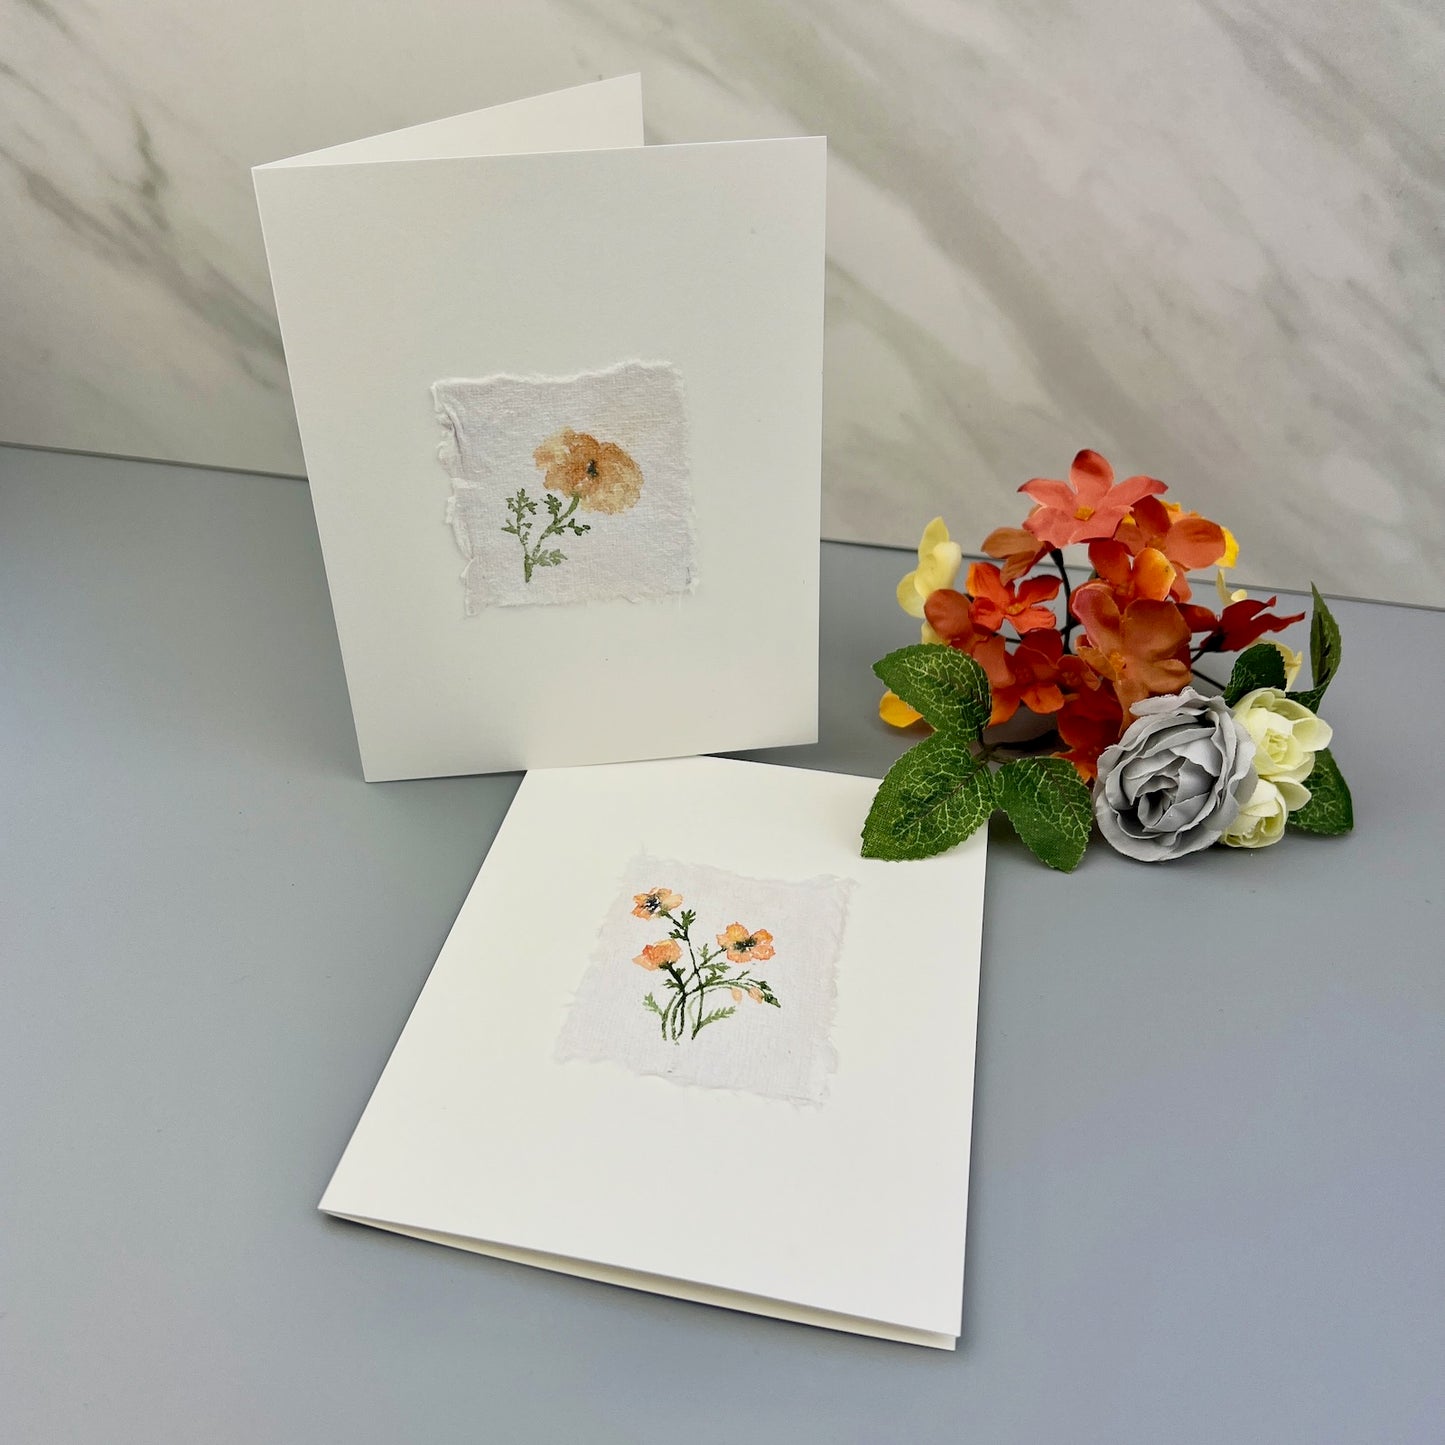 California Poppies - Hand-painted Greeting Cards - Original Watercolor Stationary